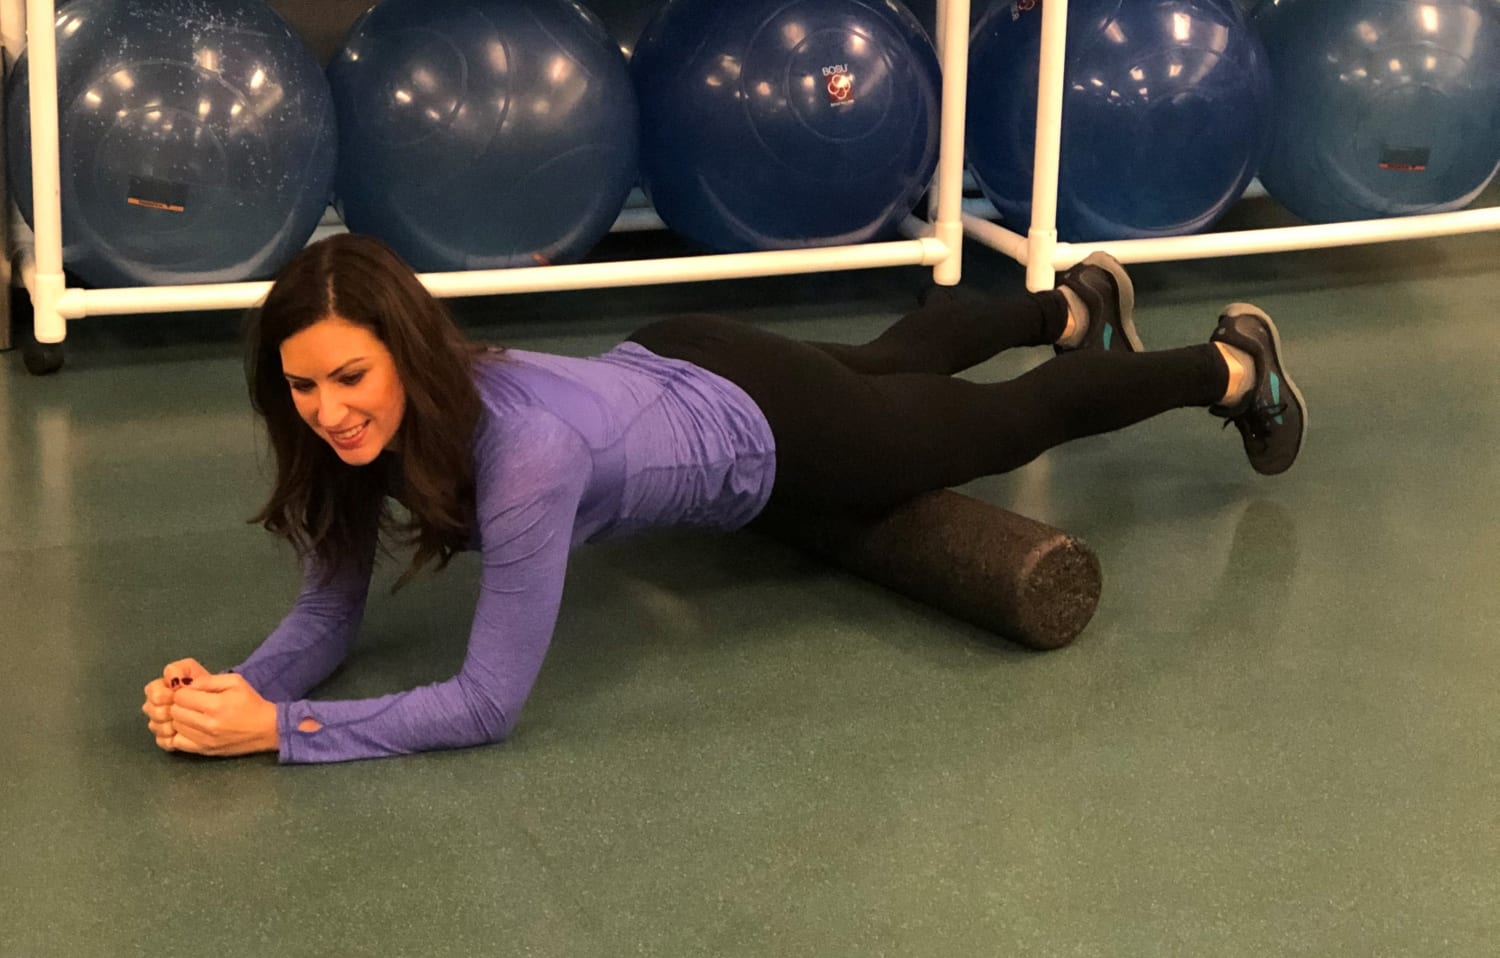 How to use a foam roller to relieve neck, back and knee pain